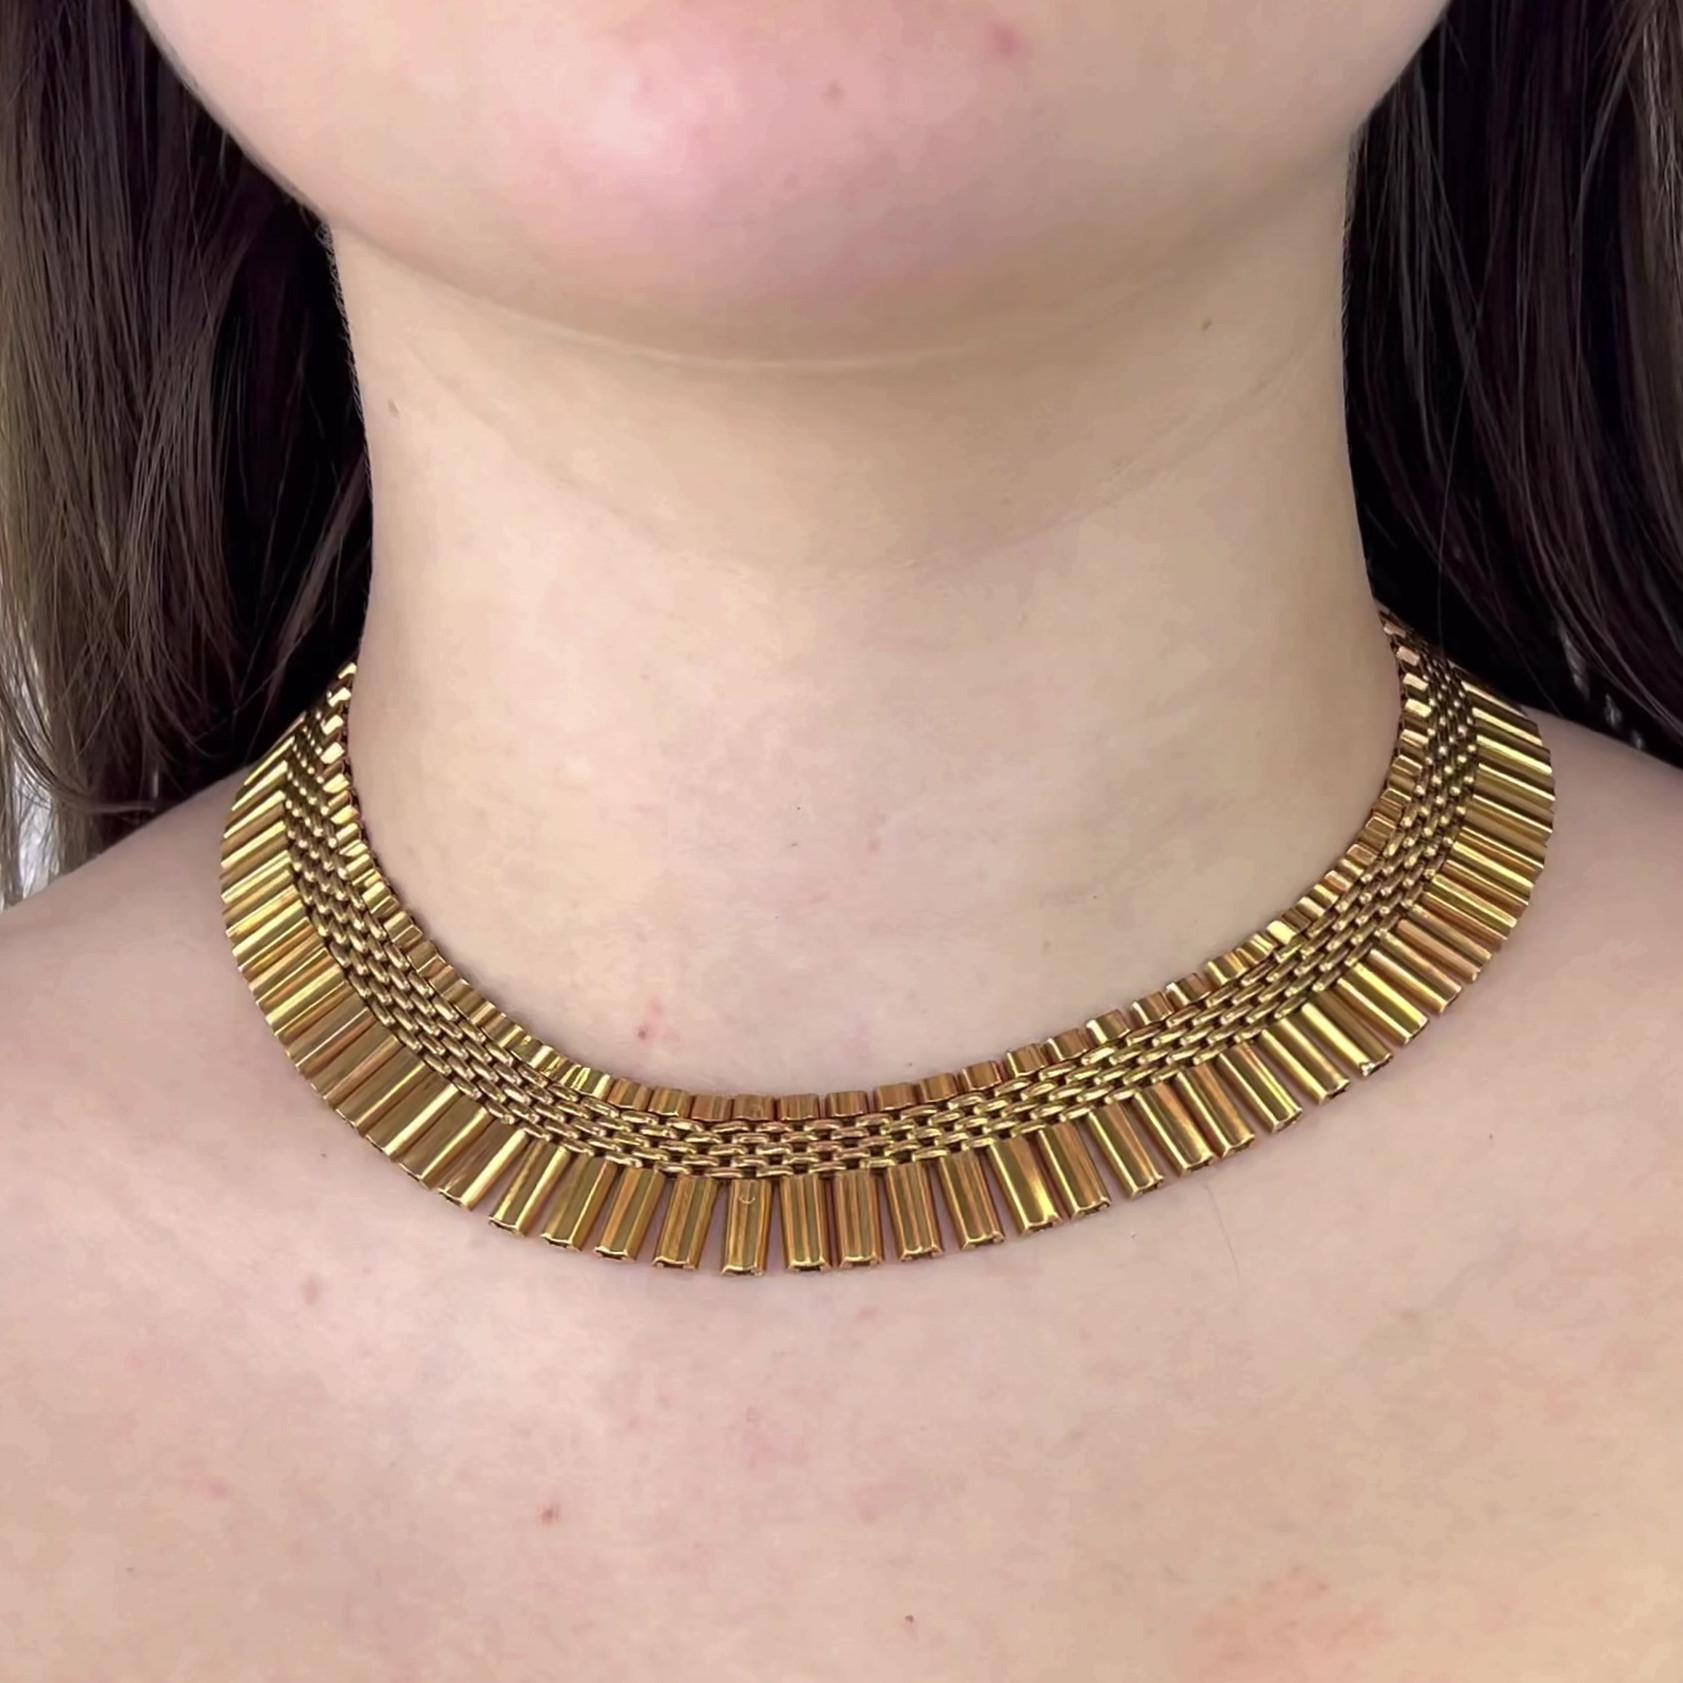 Retro 18 Karat Rose Gold Necklace. Crafted 18 karat rose gold, with purity marks. Circa 1940s. The necklace is 16 inches in length.

About this Item: This 1940's Rose Gold Necklace is a true stunner! With its chain-link texture and rose gold